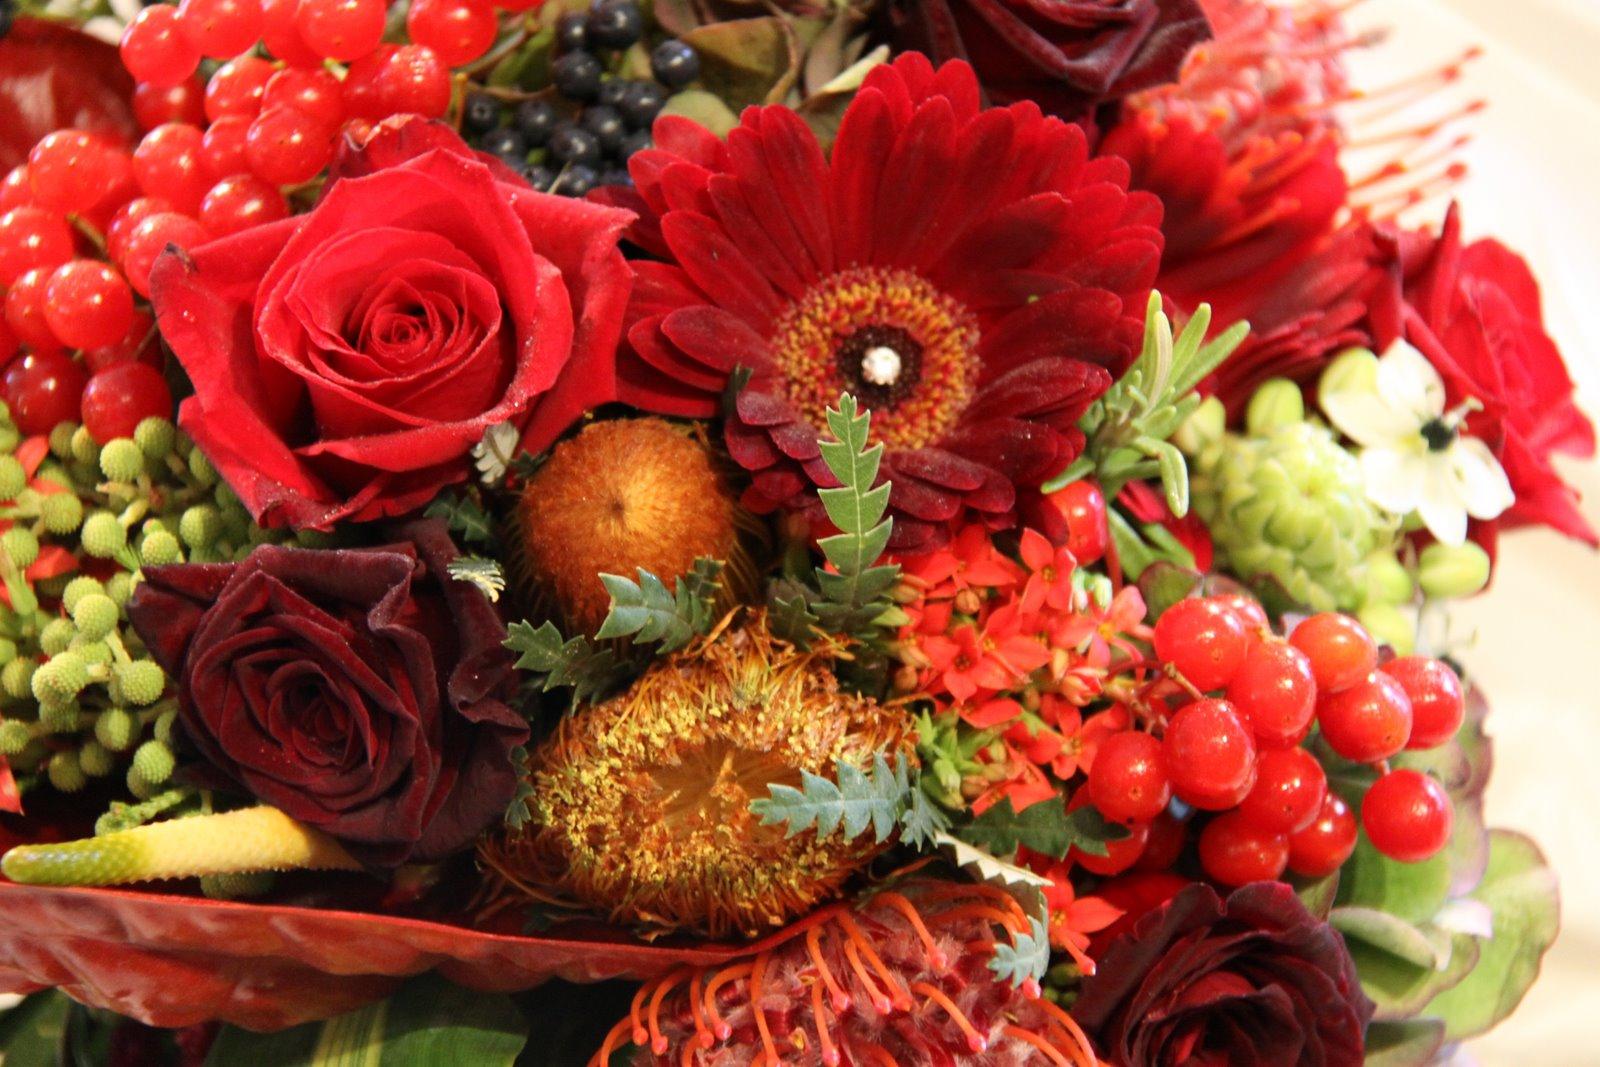 The Flower Magician: The Jewels of Autumn Wedding Bouquet